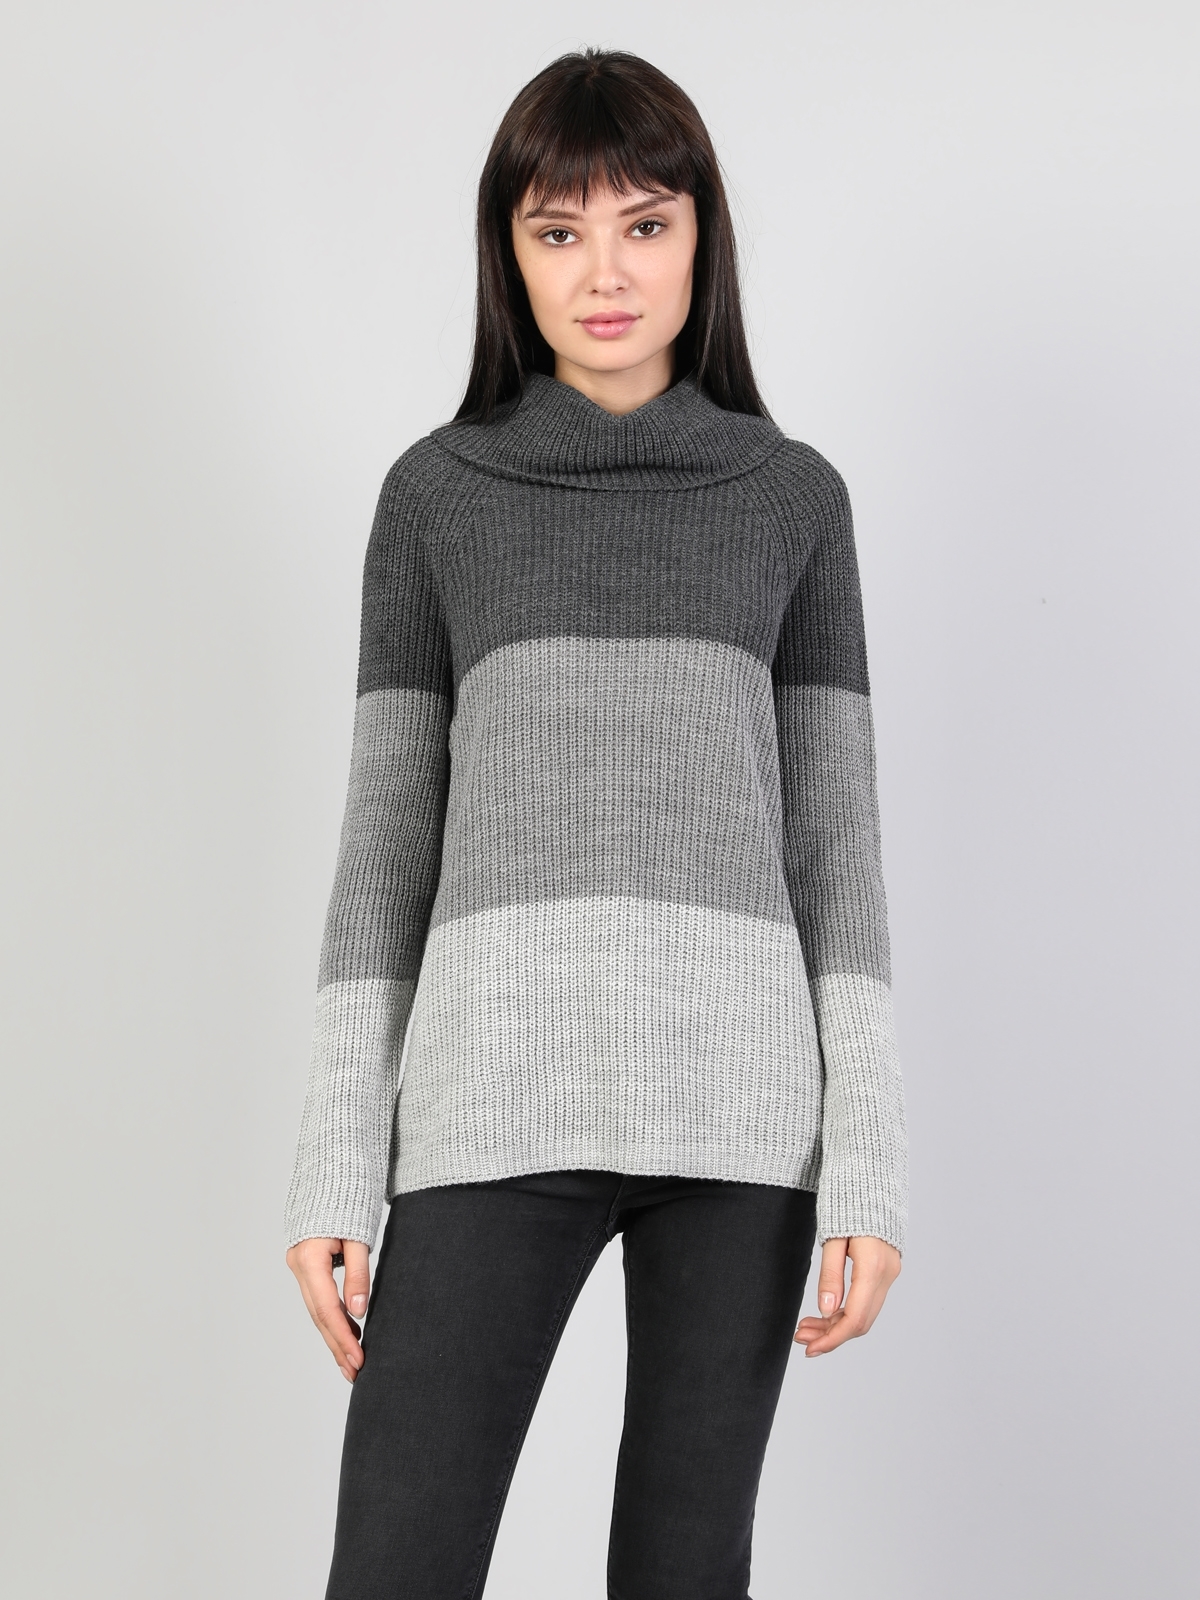 Colins Gray Woman Sweaters. 4